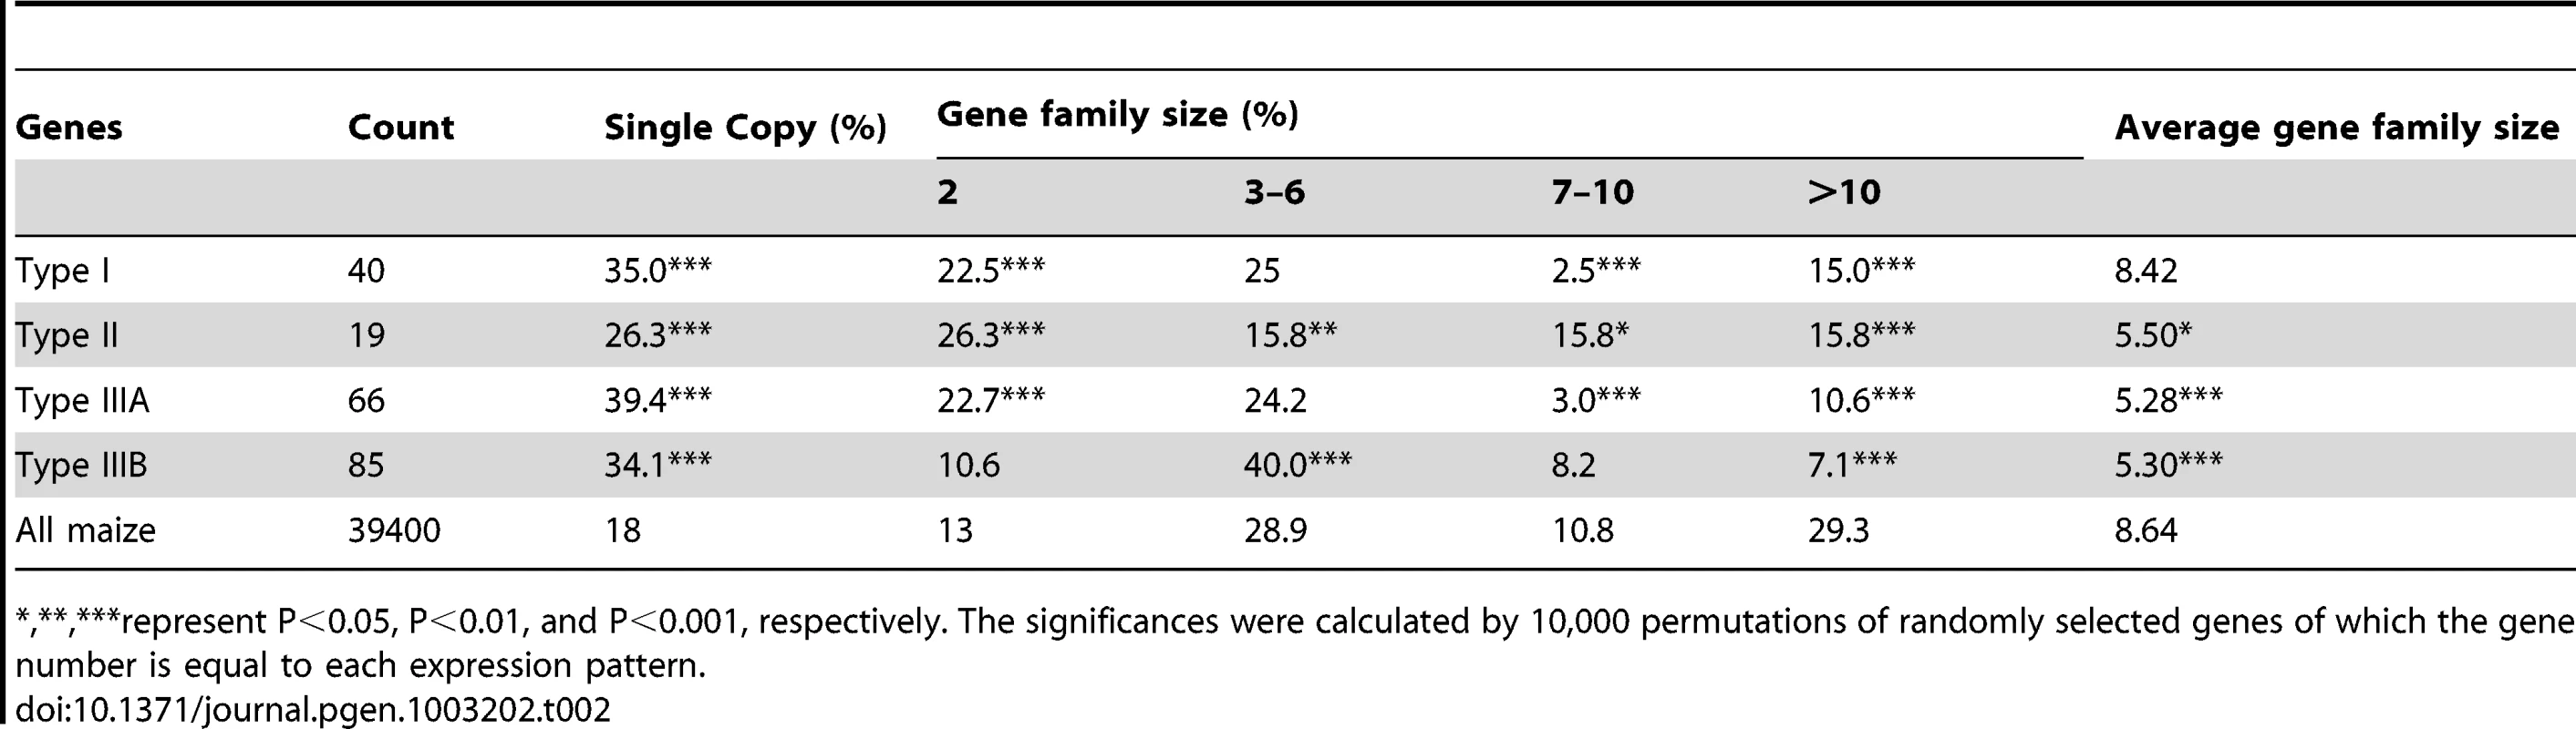 Gene family size for genes with unexpected expression patterns.